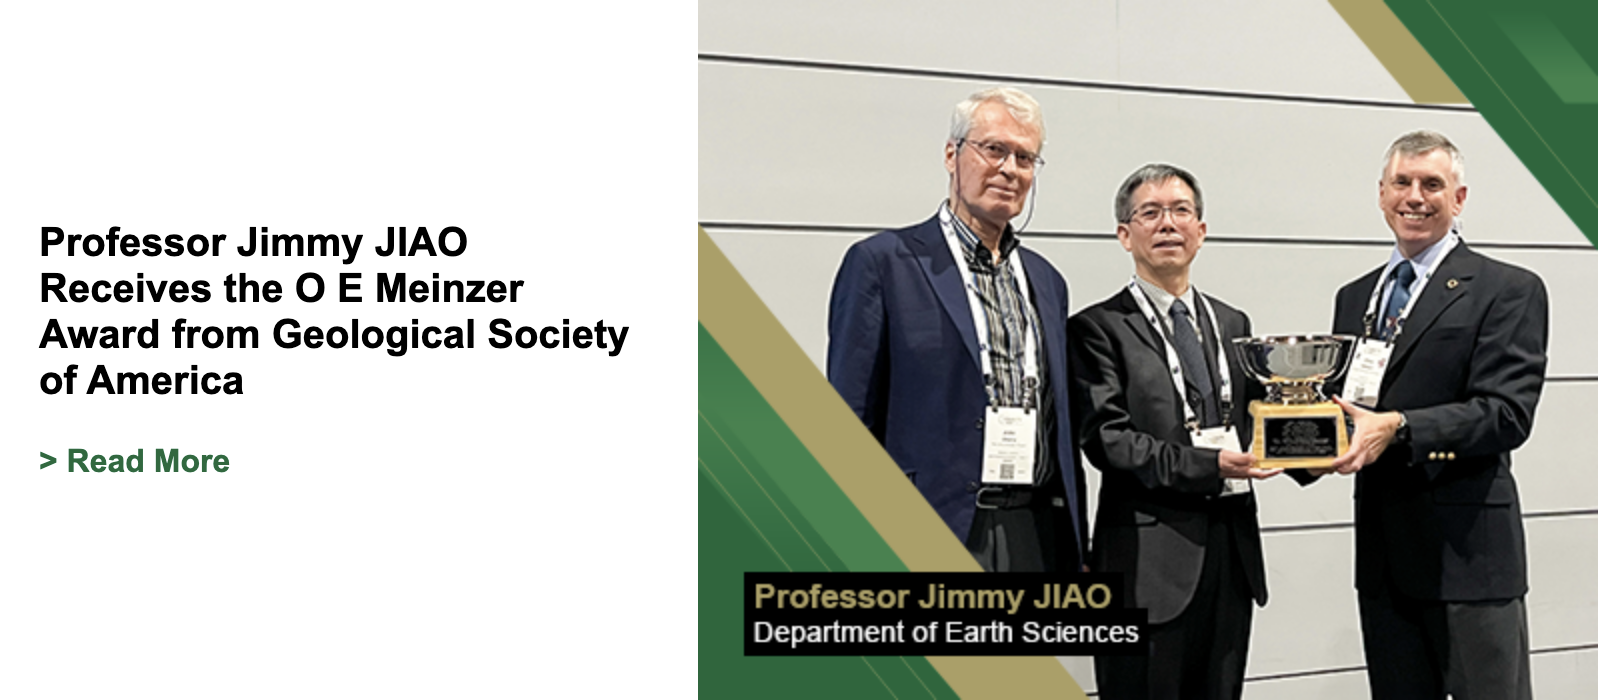 Professor Jimmy JIAO receives the O E Meinzer Award from Geological Society of America